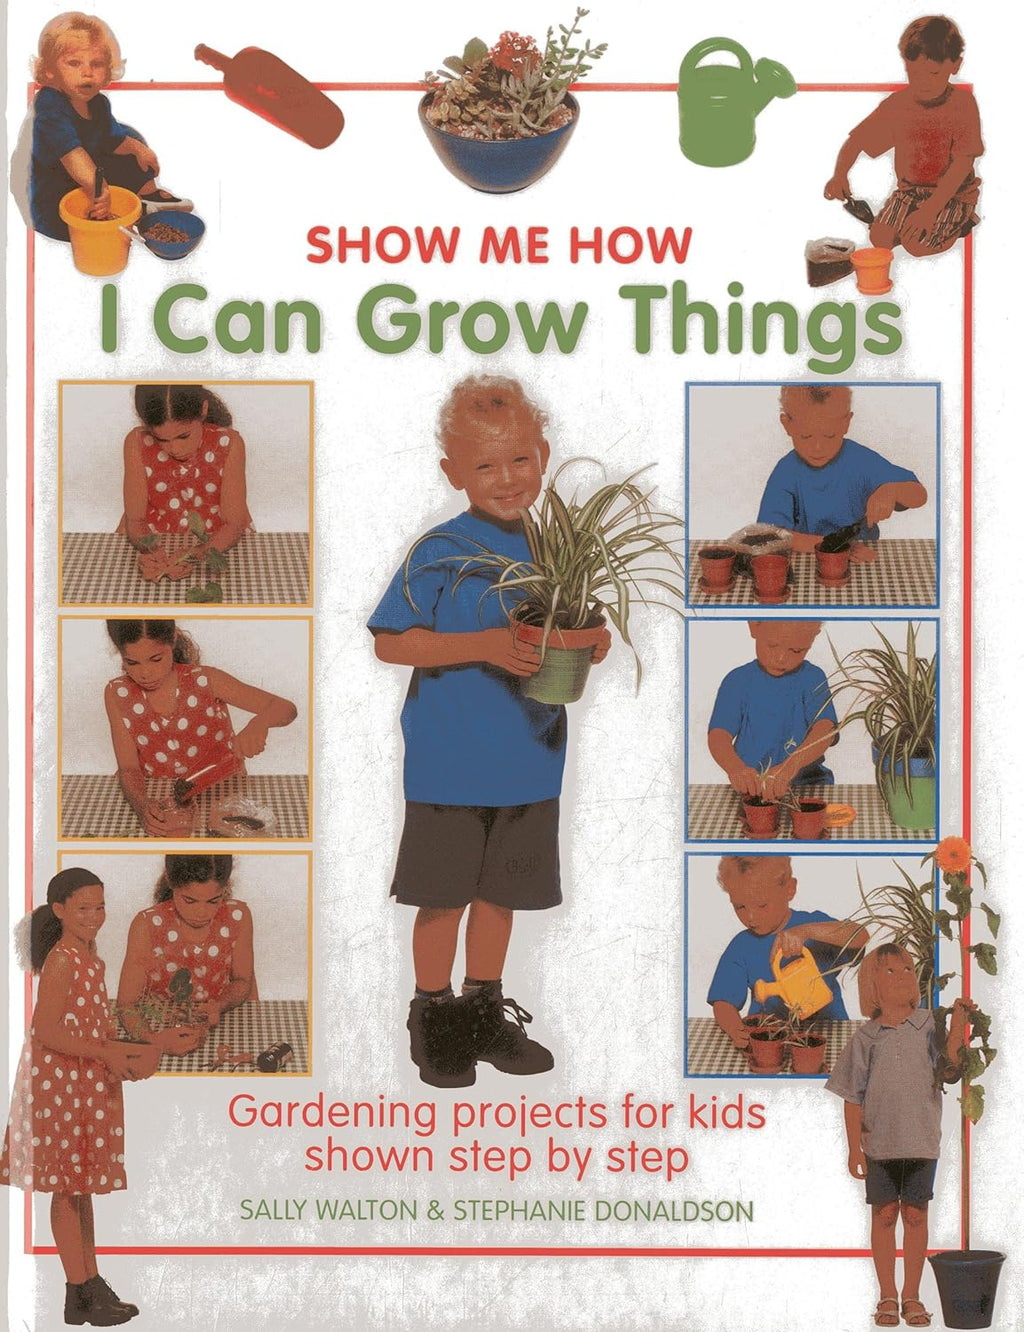 Show Me How: I Can Grow Things